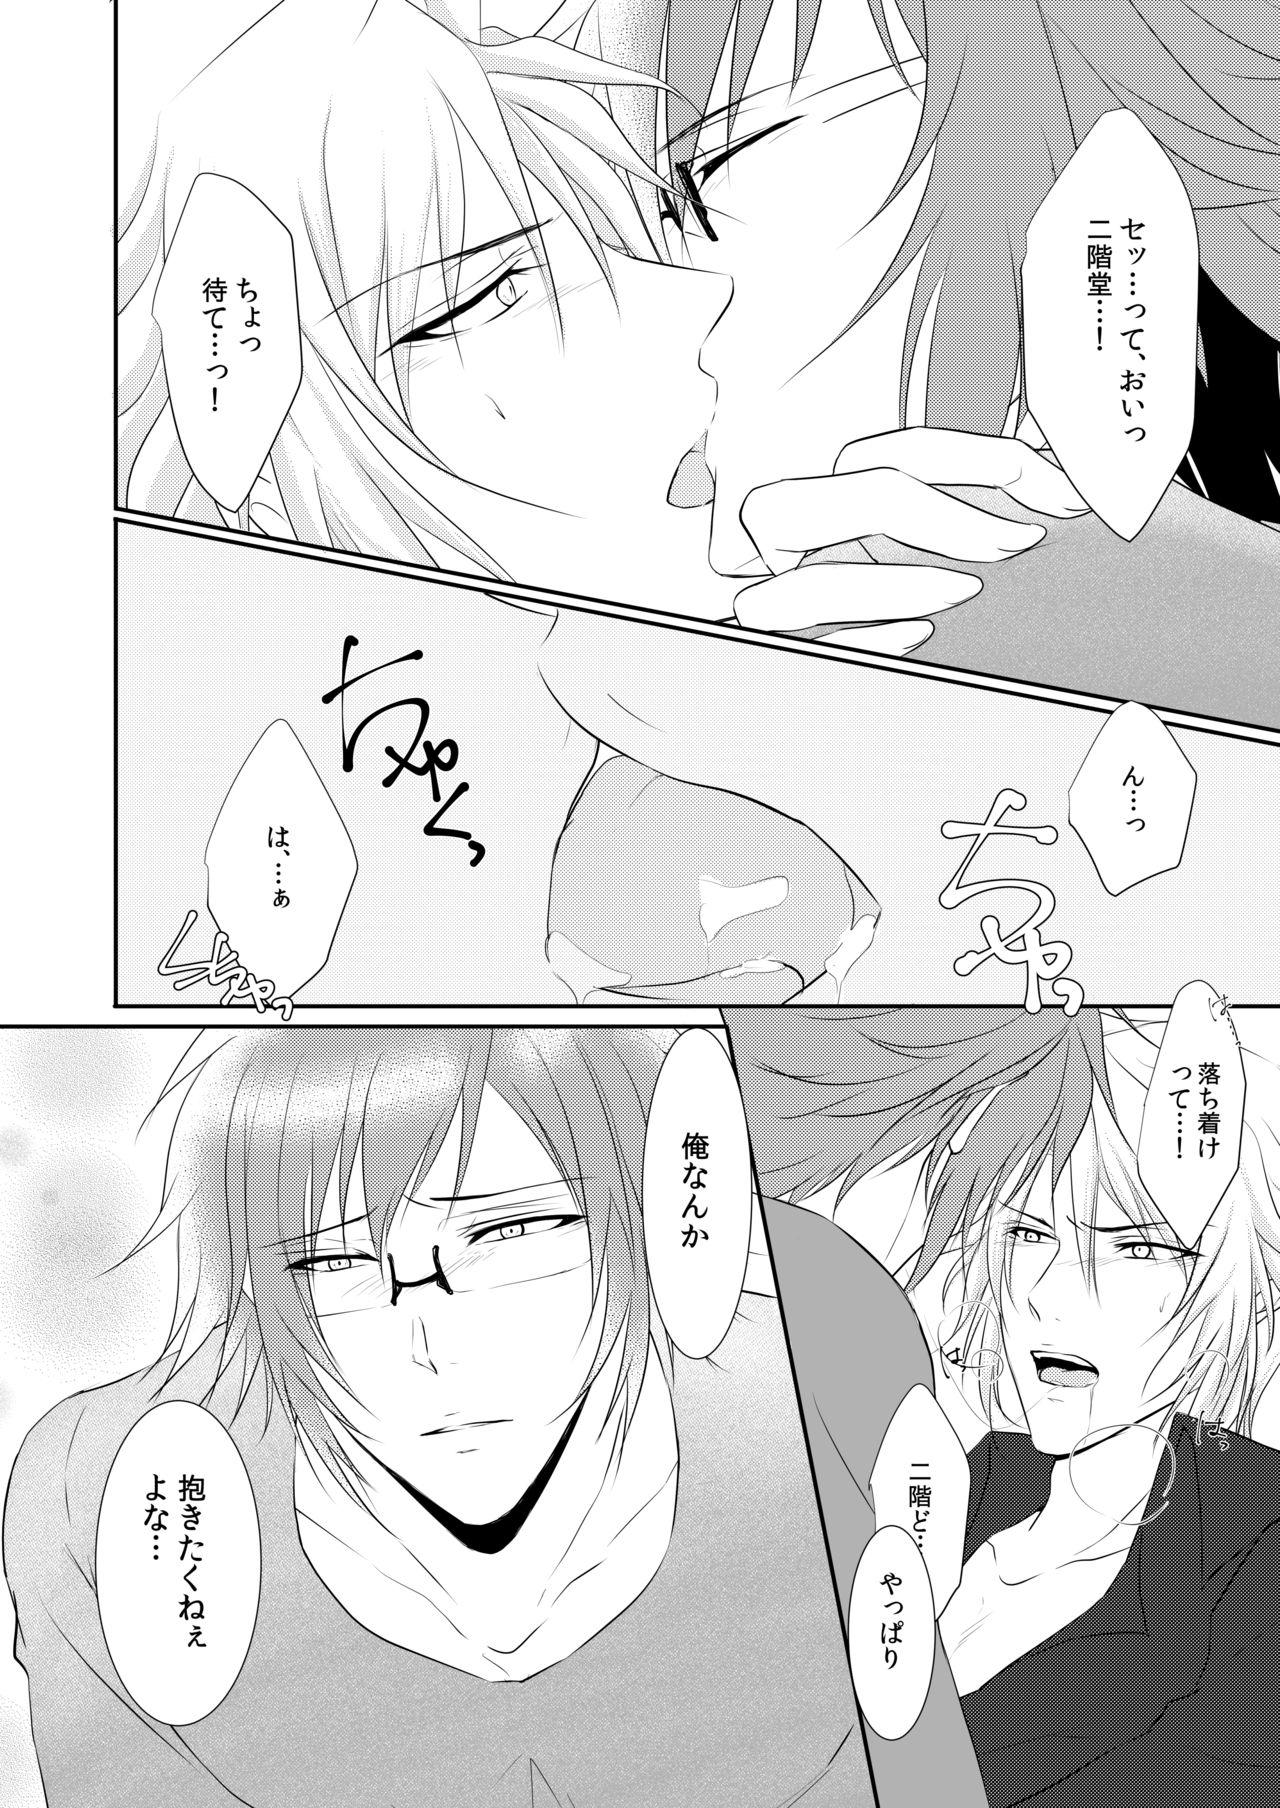 Amador My lips to overlip your lips - Idolish7 Thailand - Page 7